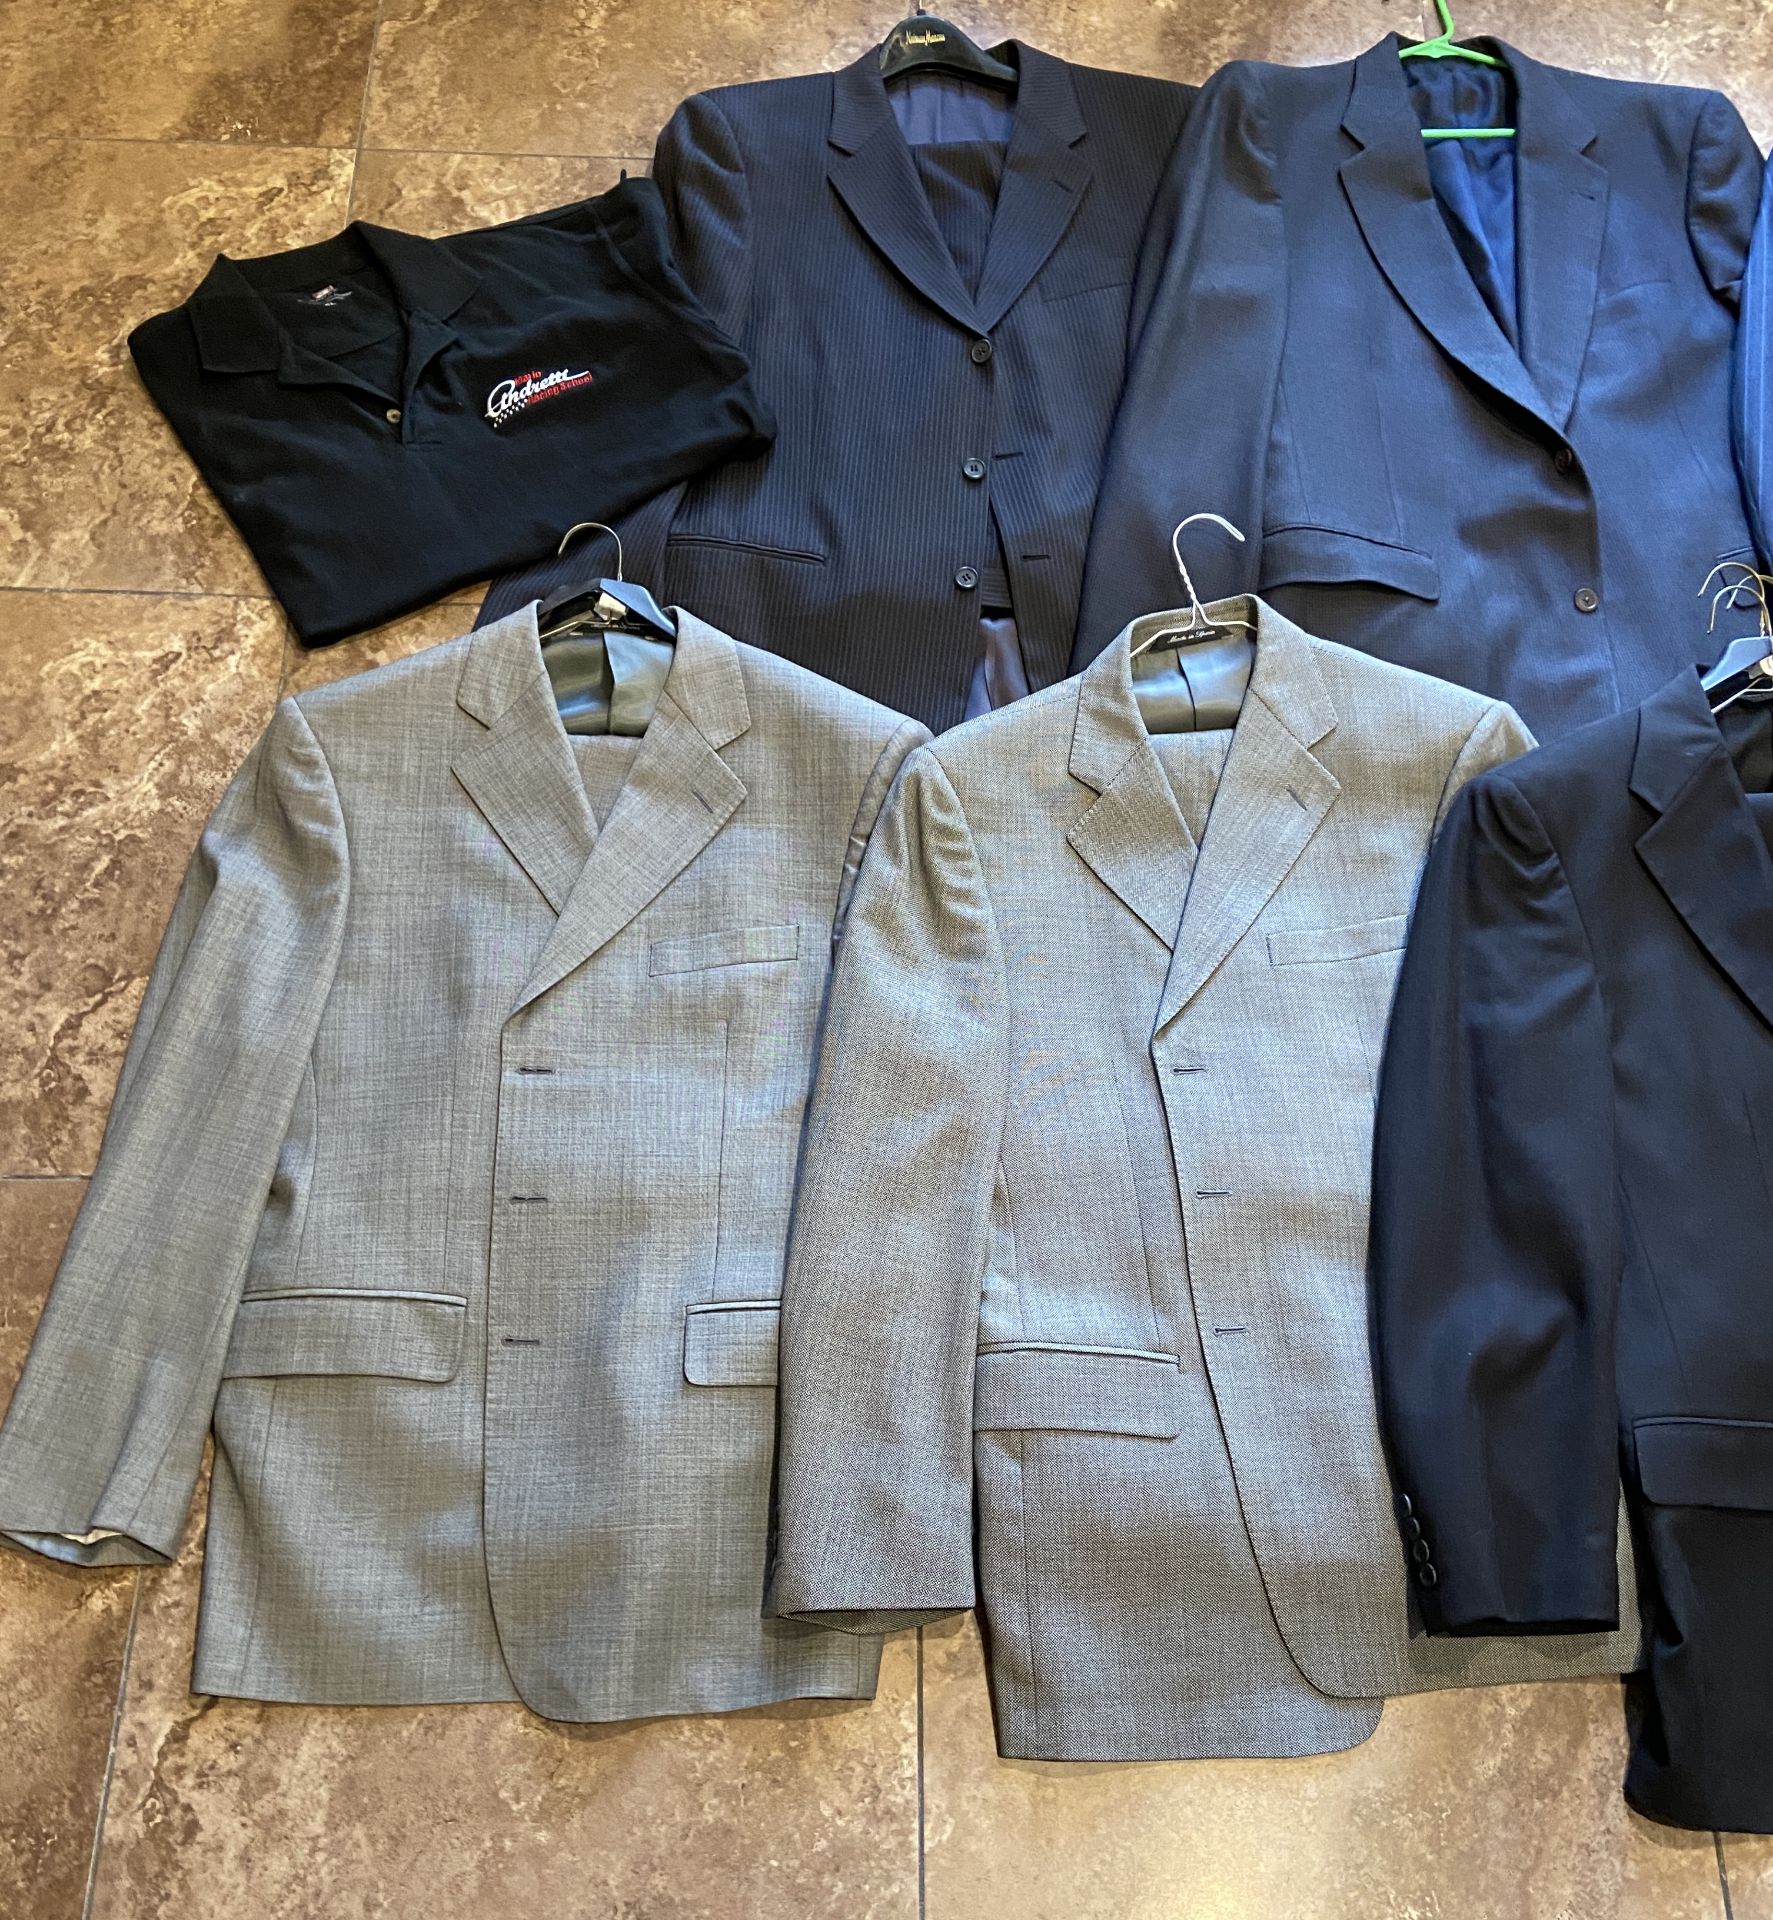 Collection of High End Men's Clothing: 6 Suits Size 42R, 1 Sport Jacket Size 42R, 1 Polo XL - Image 3 of 18